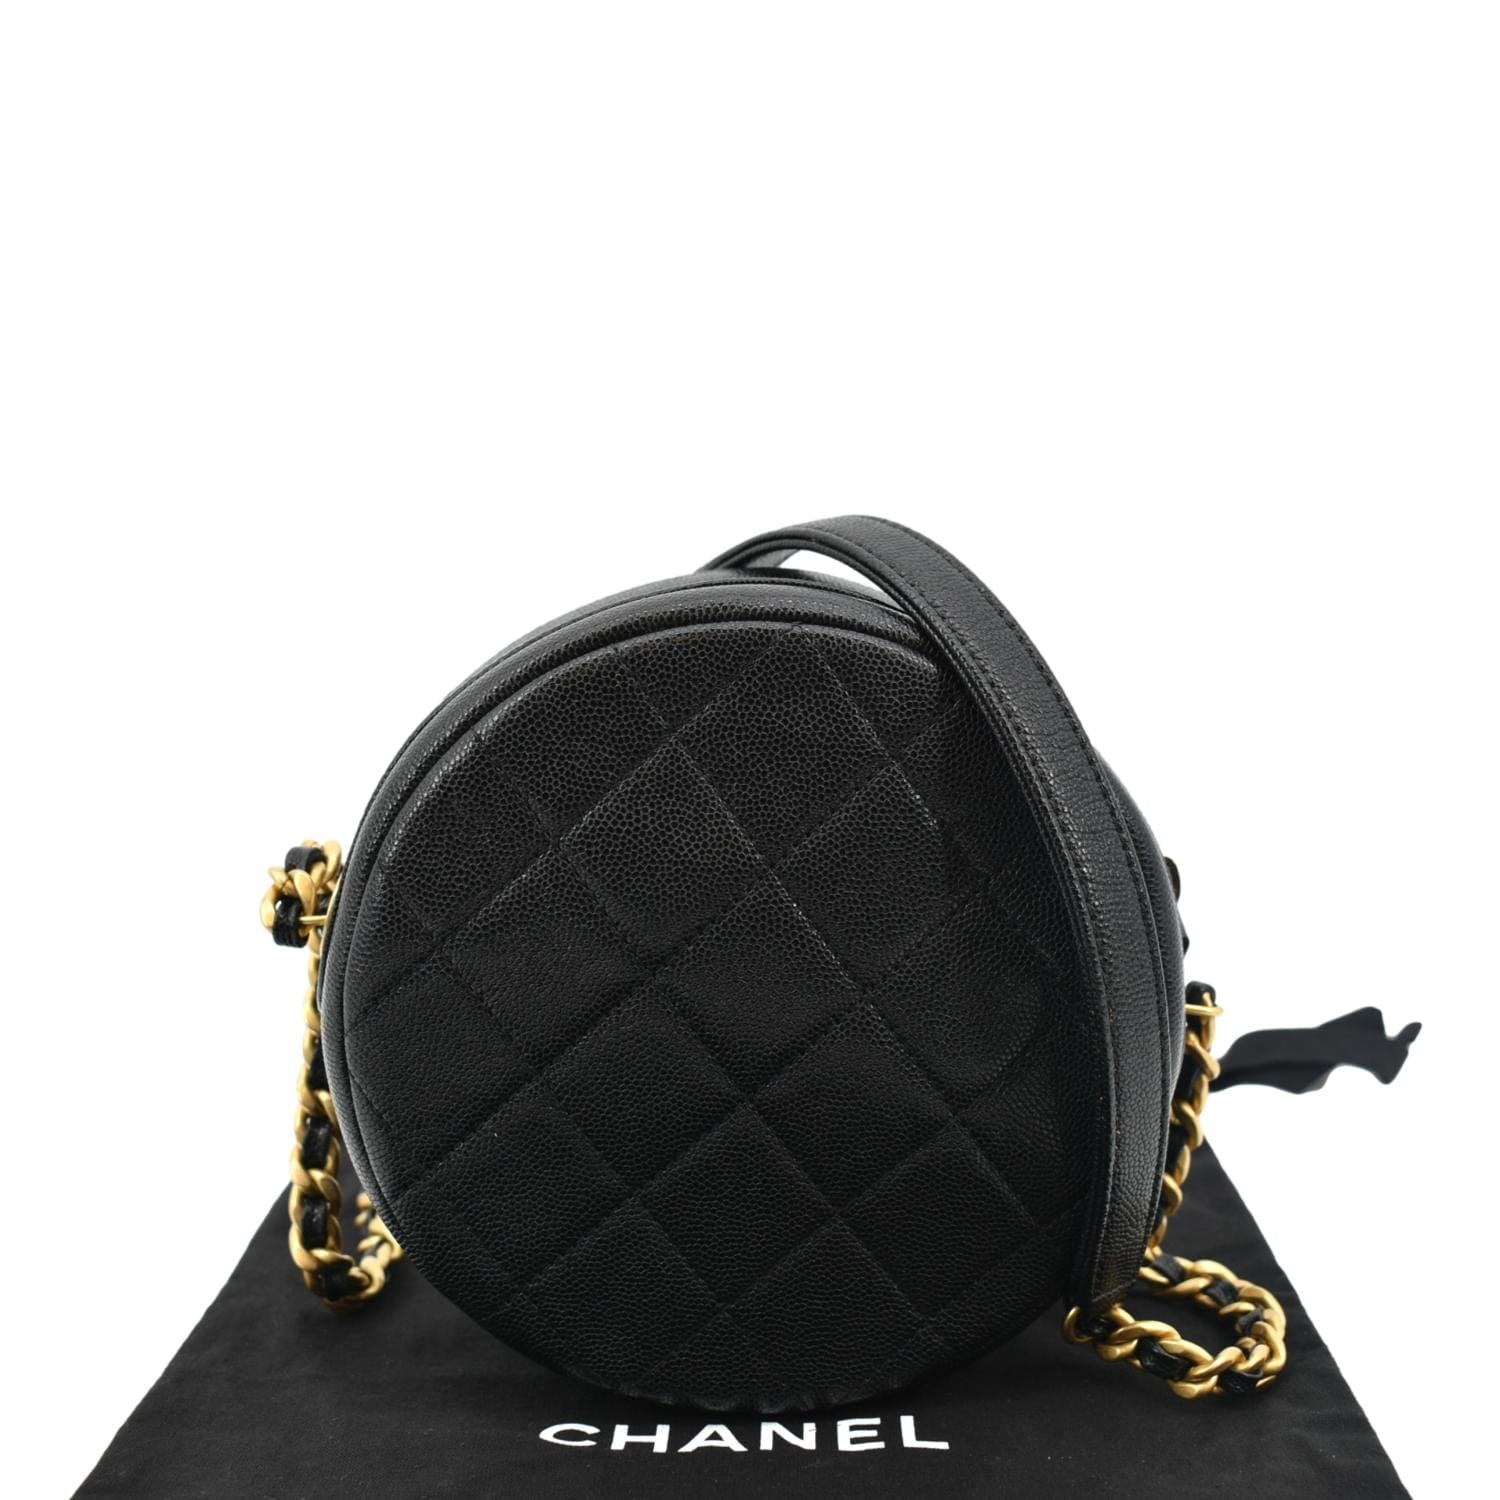 Chanel Black Lambskin Leather Circle Bag with Gold Embellishments  Mine   Yours